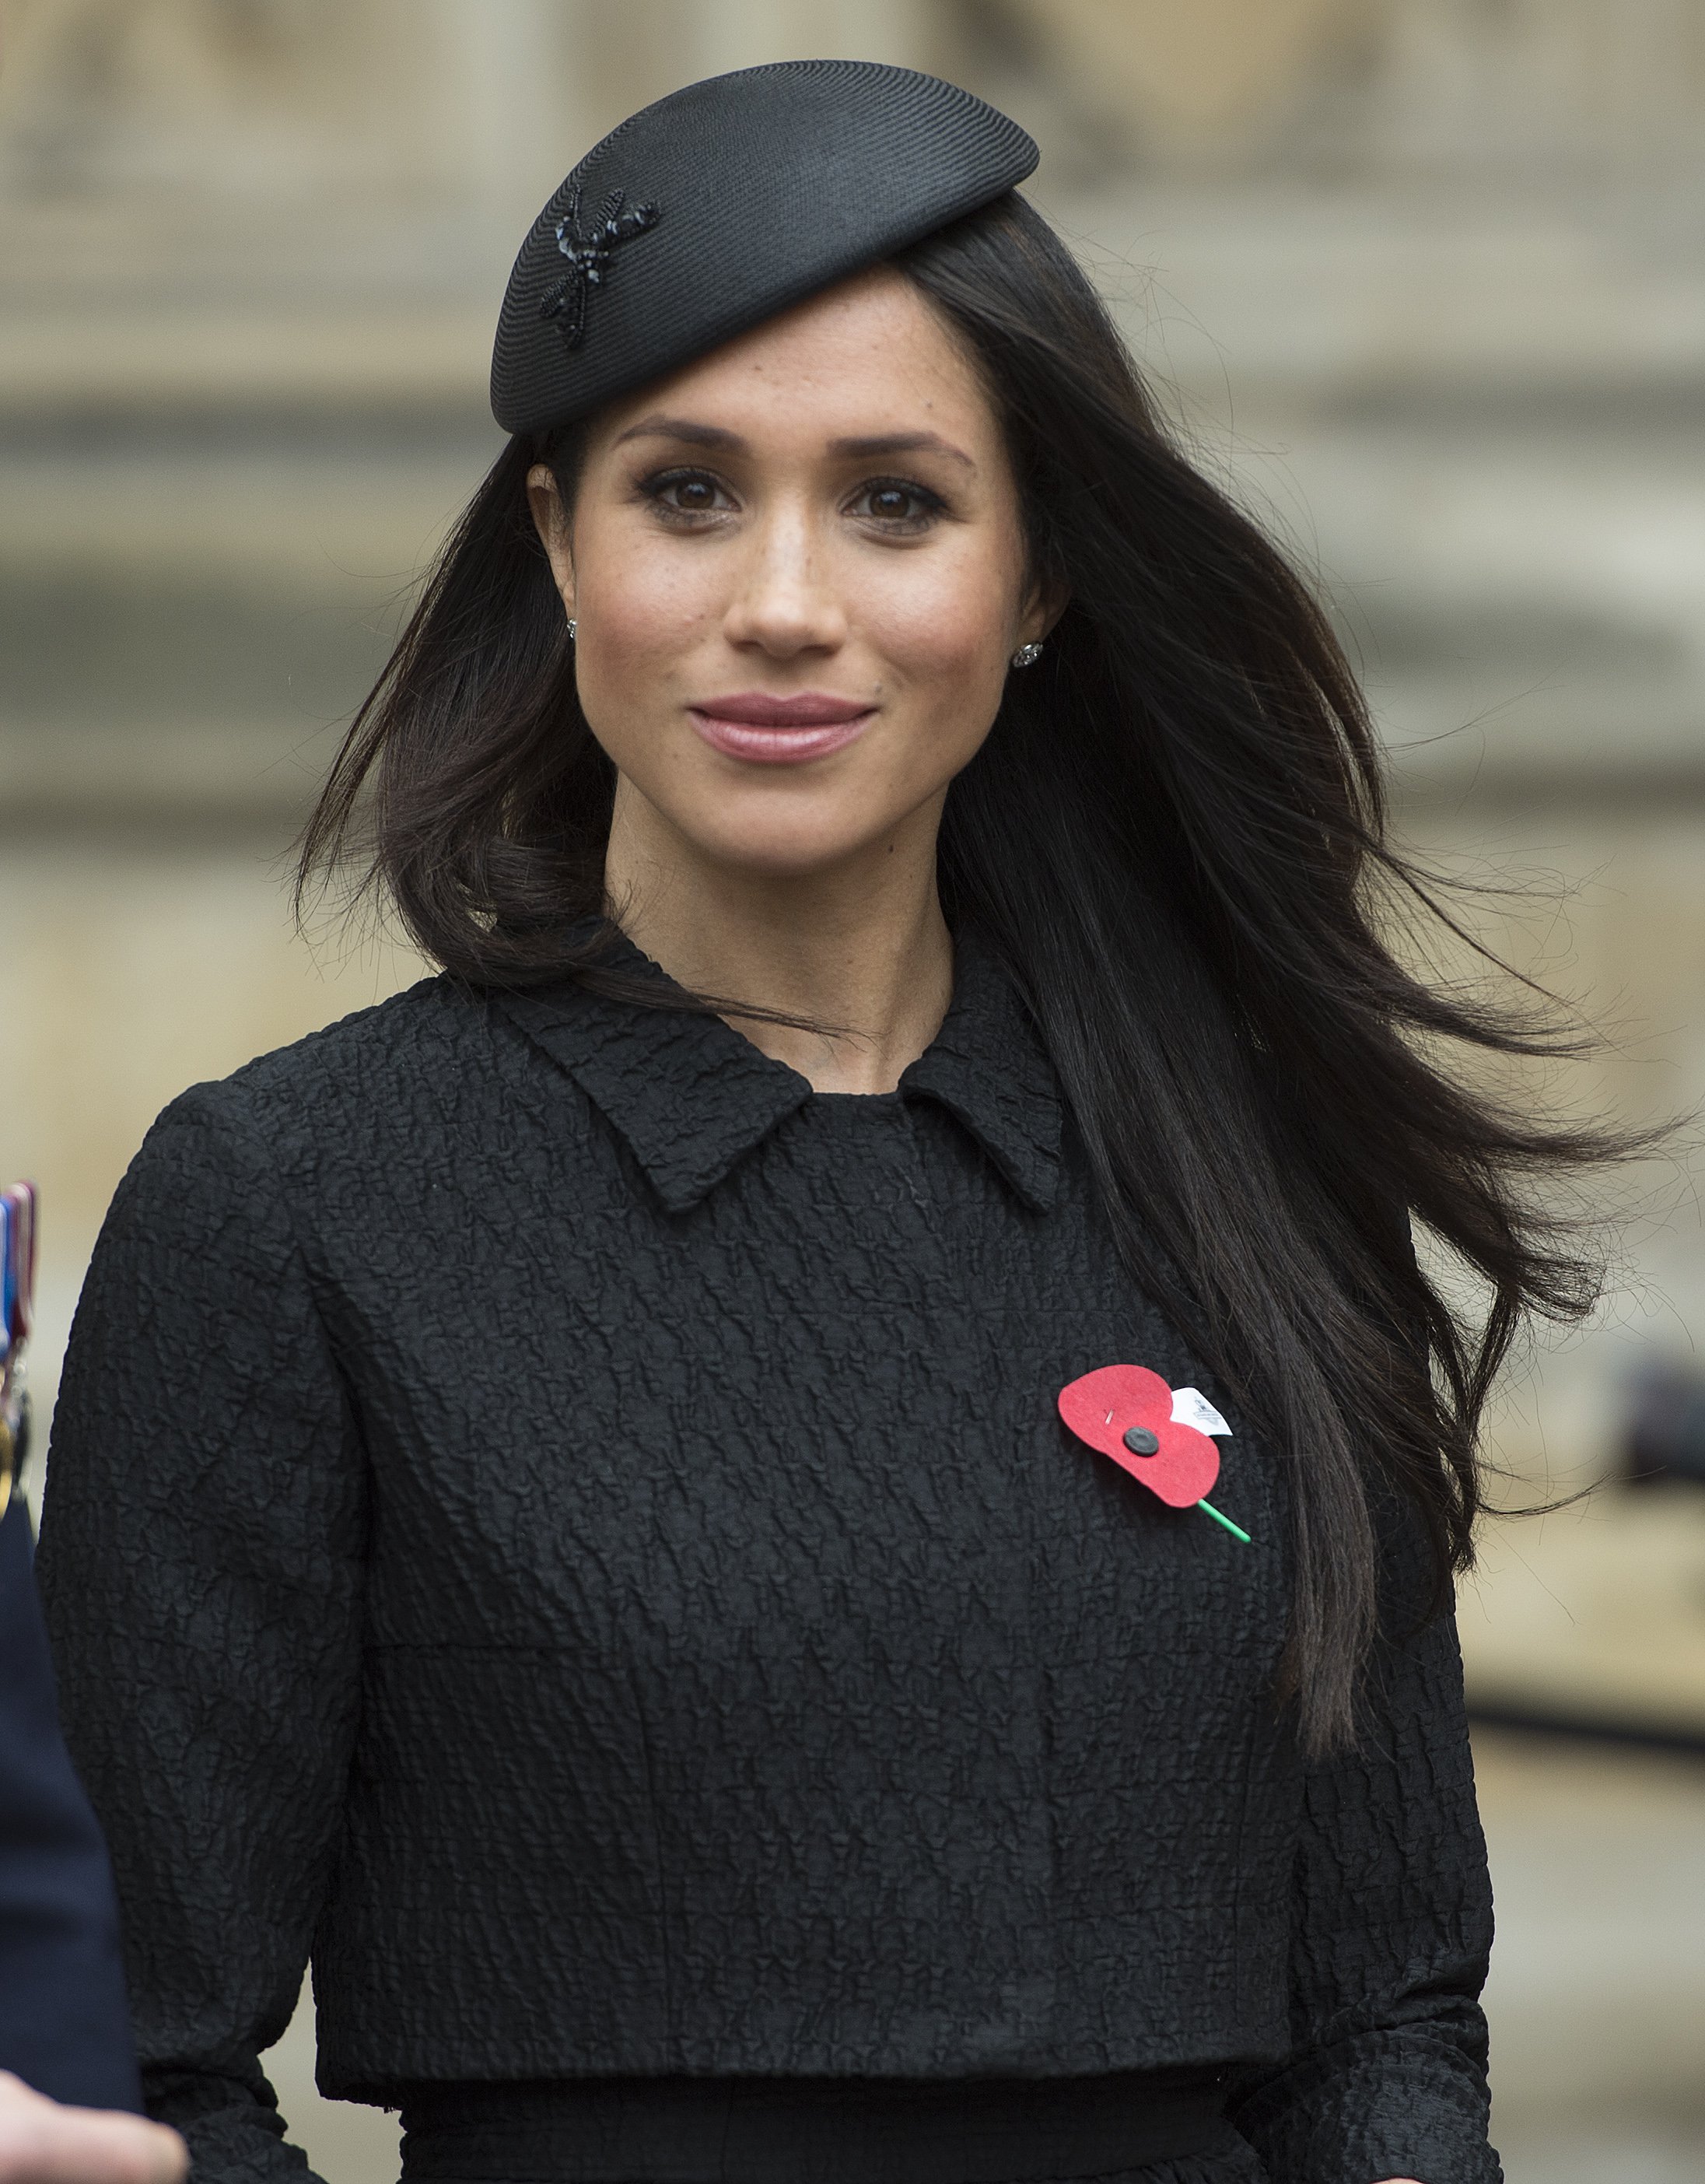 Meghan Markle attends an Anzac Day service at Westminster Abbey on April 25, 2018 in London, England | Photo: Getty Images